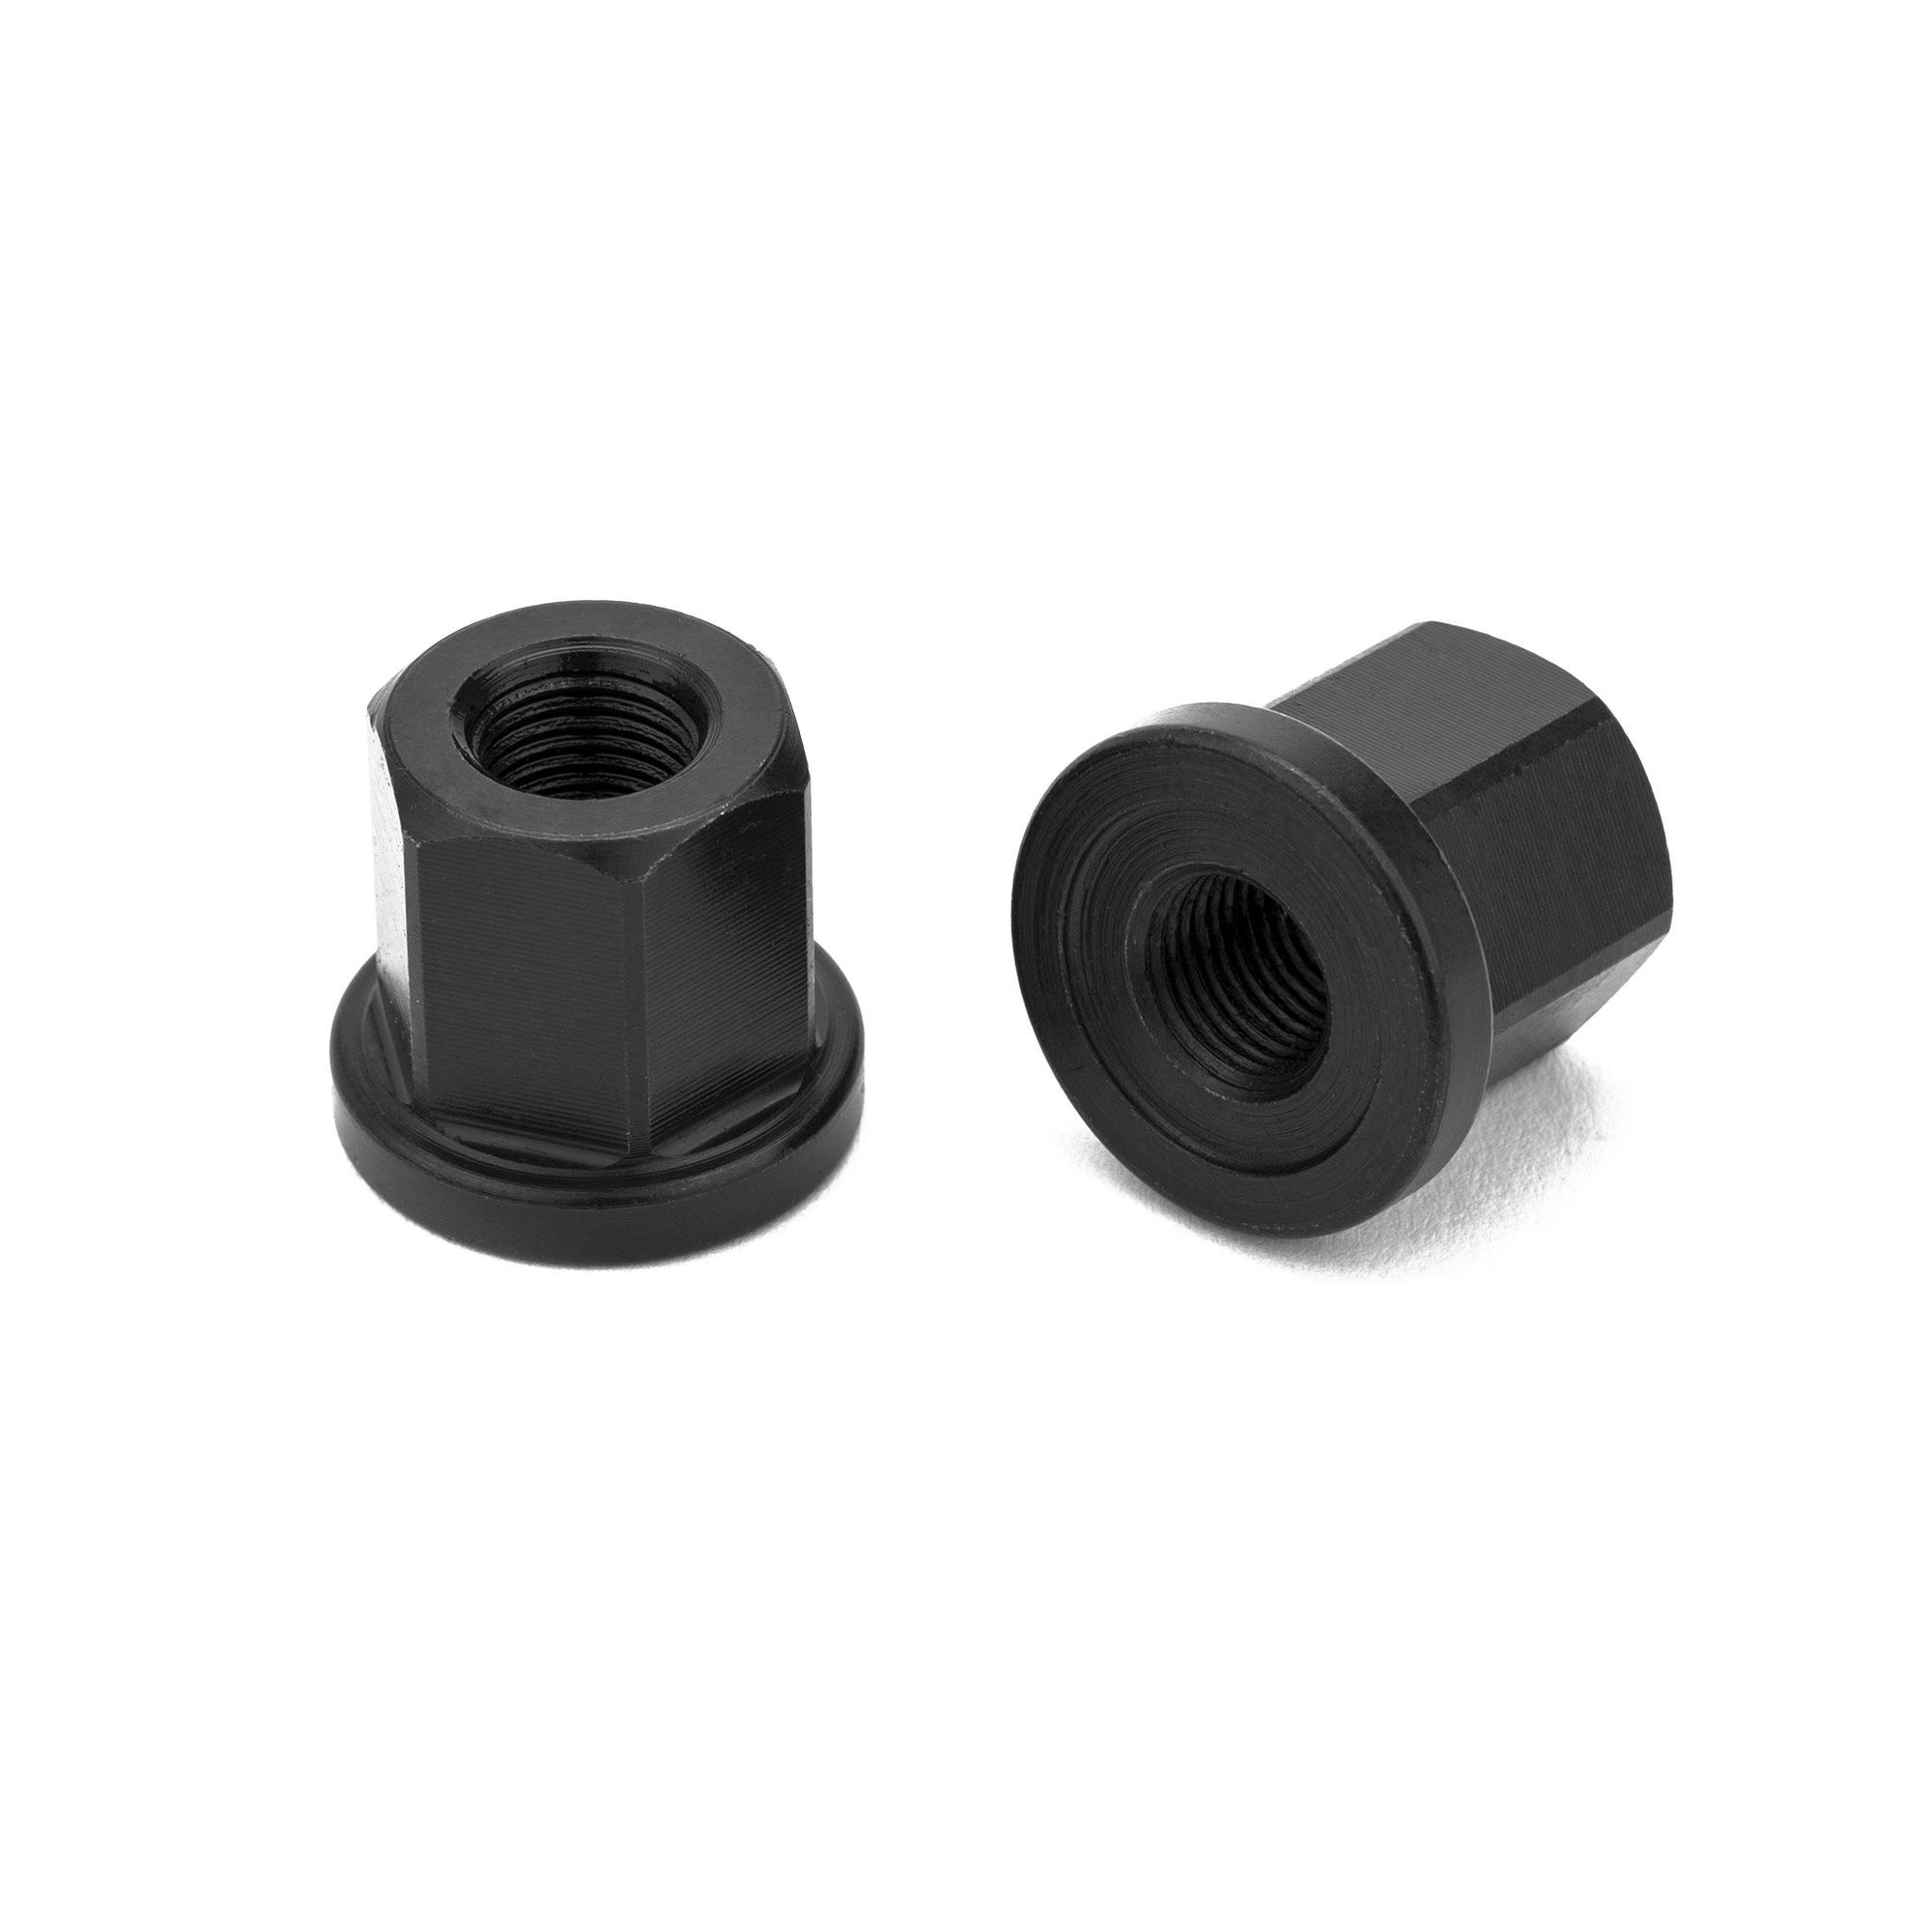 Mission Steel Axle Nuts - Black (3/8" or 14mm) - Downtown Bicycle Works 